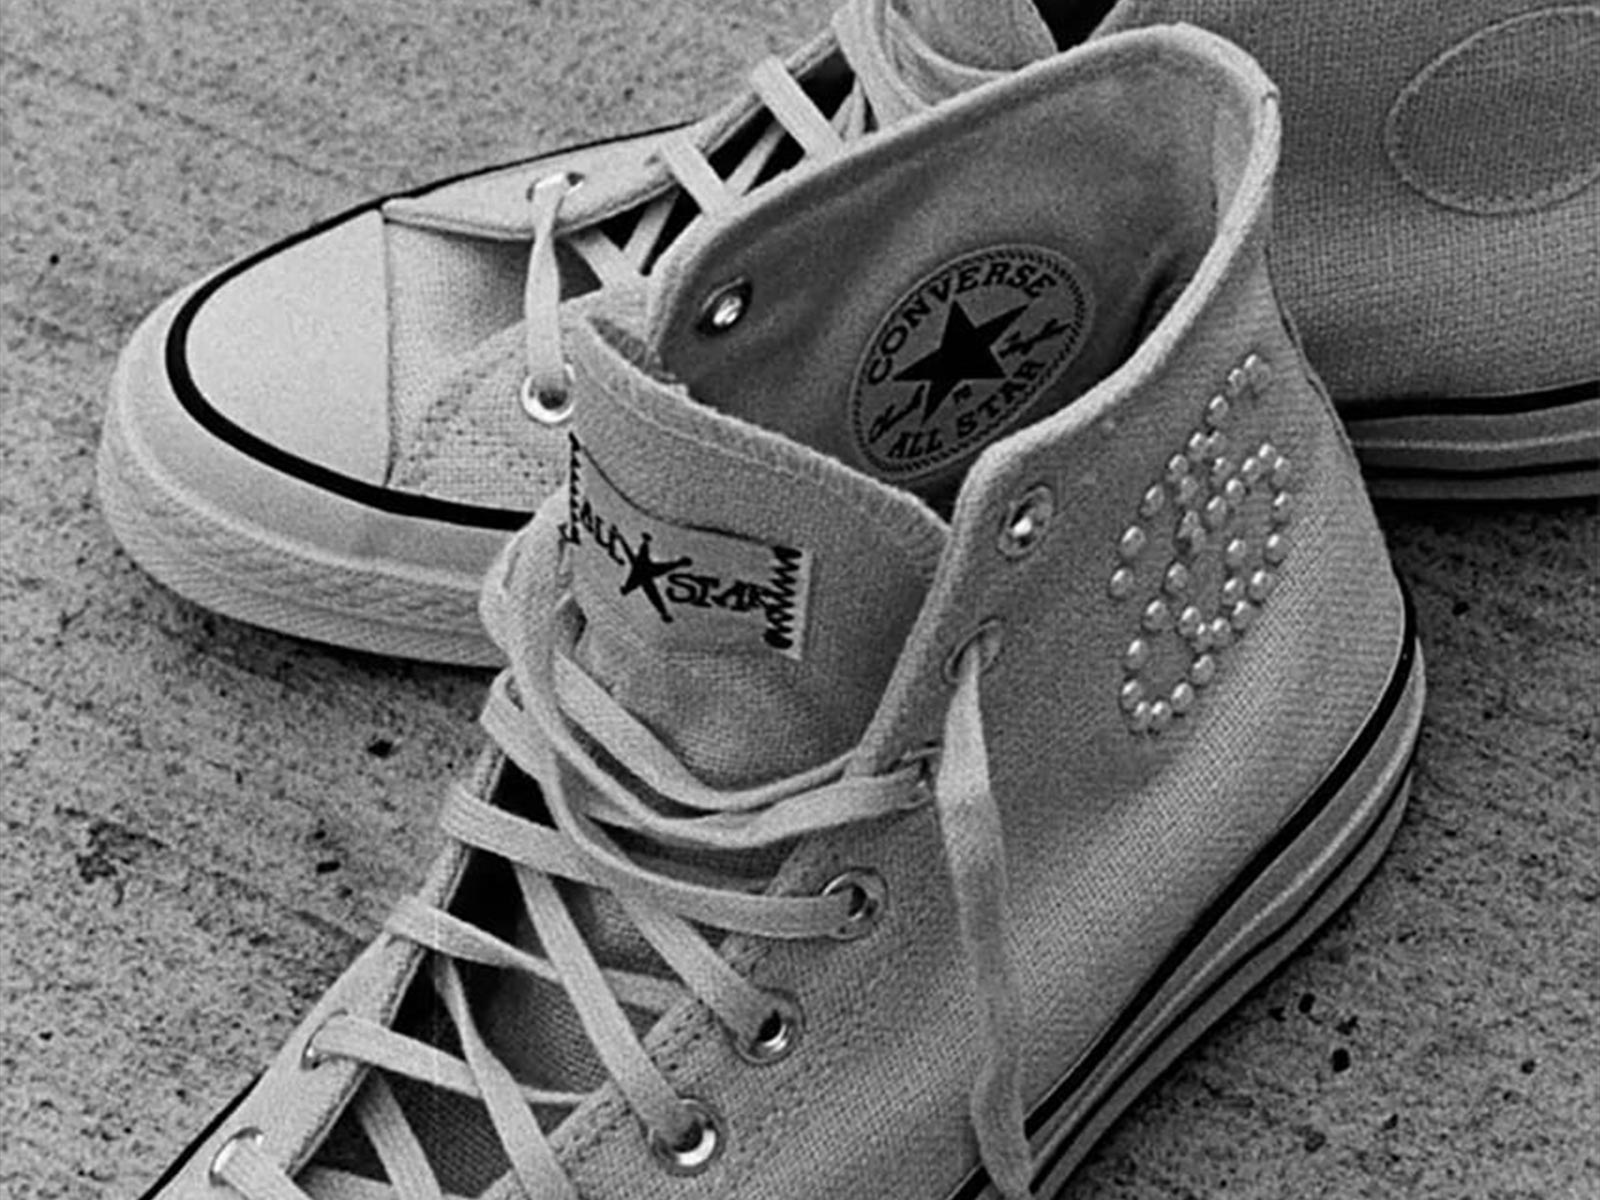 Converse and Stüssy design a new version of the Chuck 70 Hi